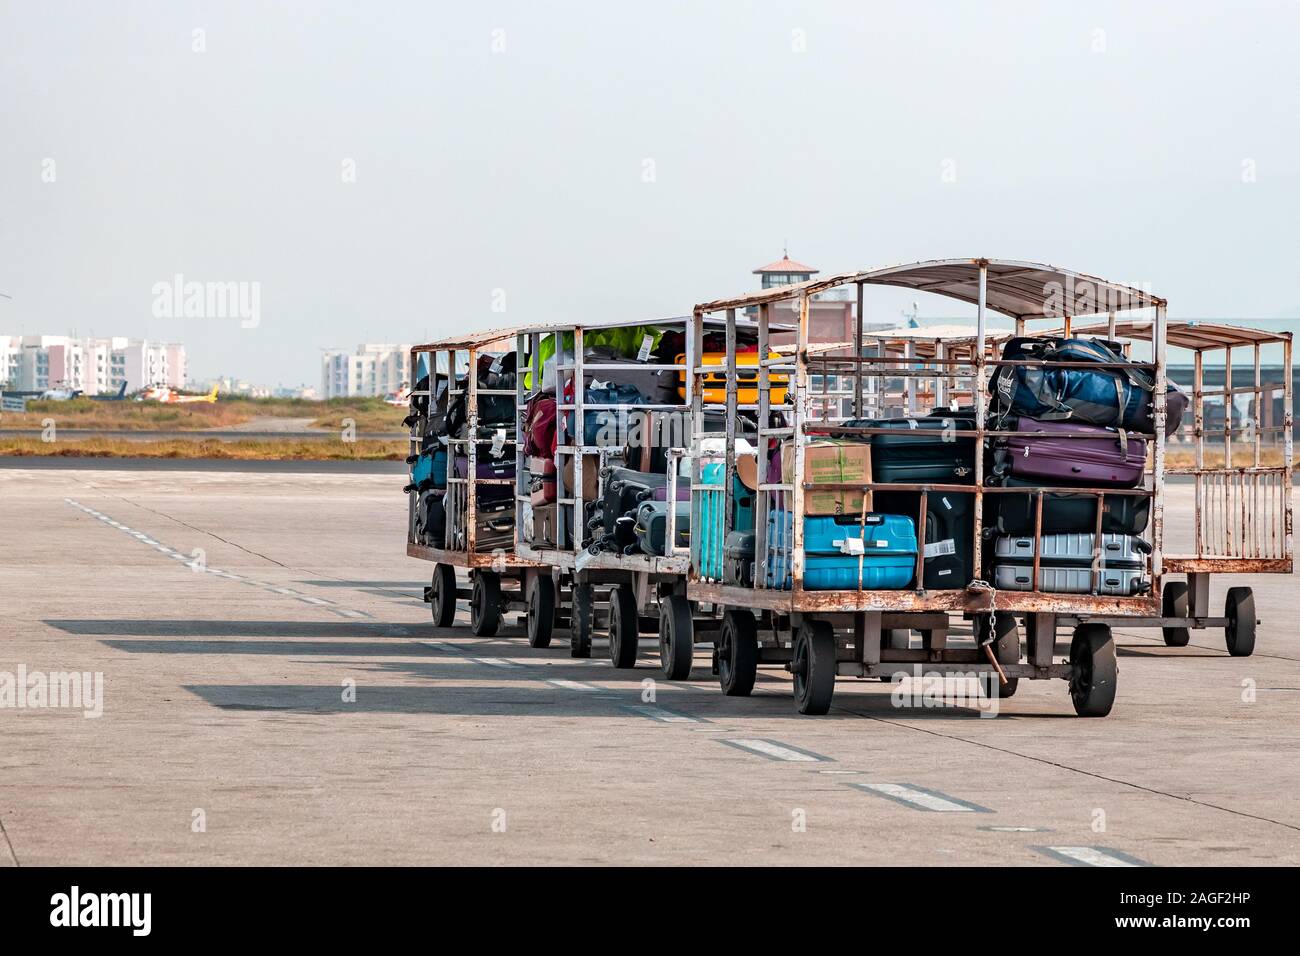 Luggage waiting on taxiway to be loaded on airplane at an airport Stock Photo